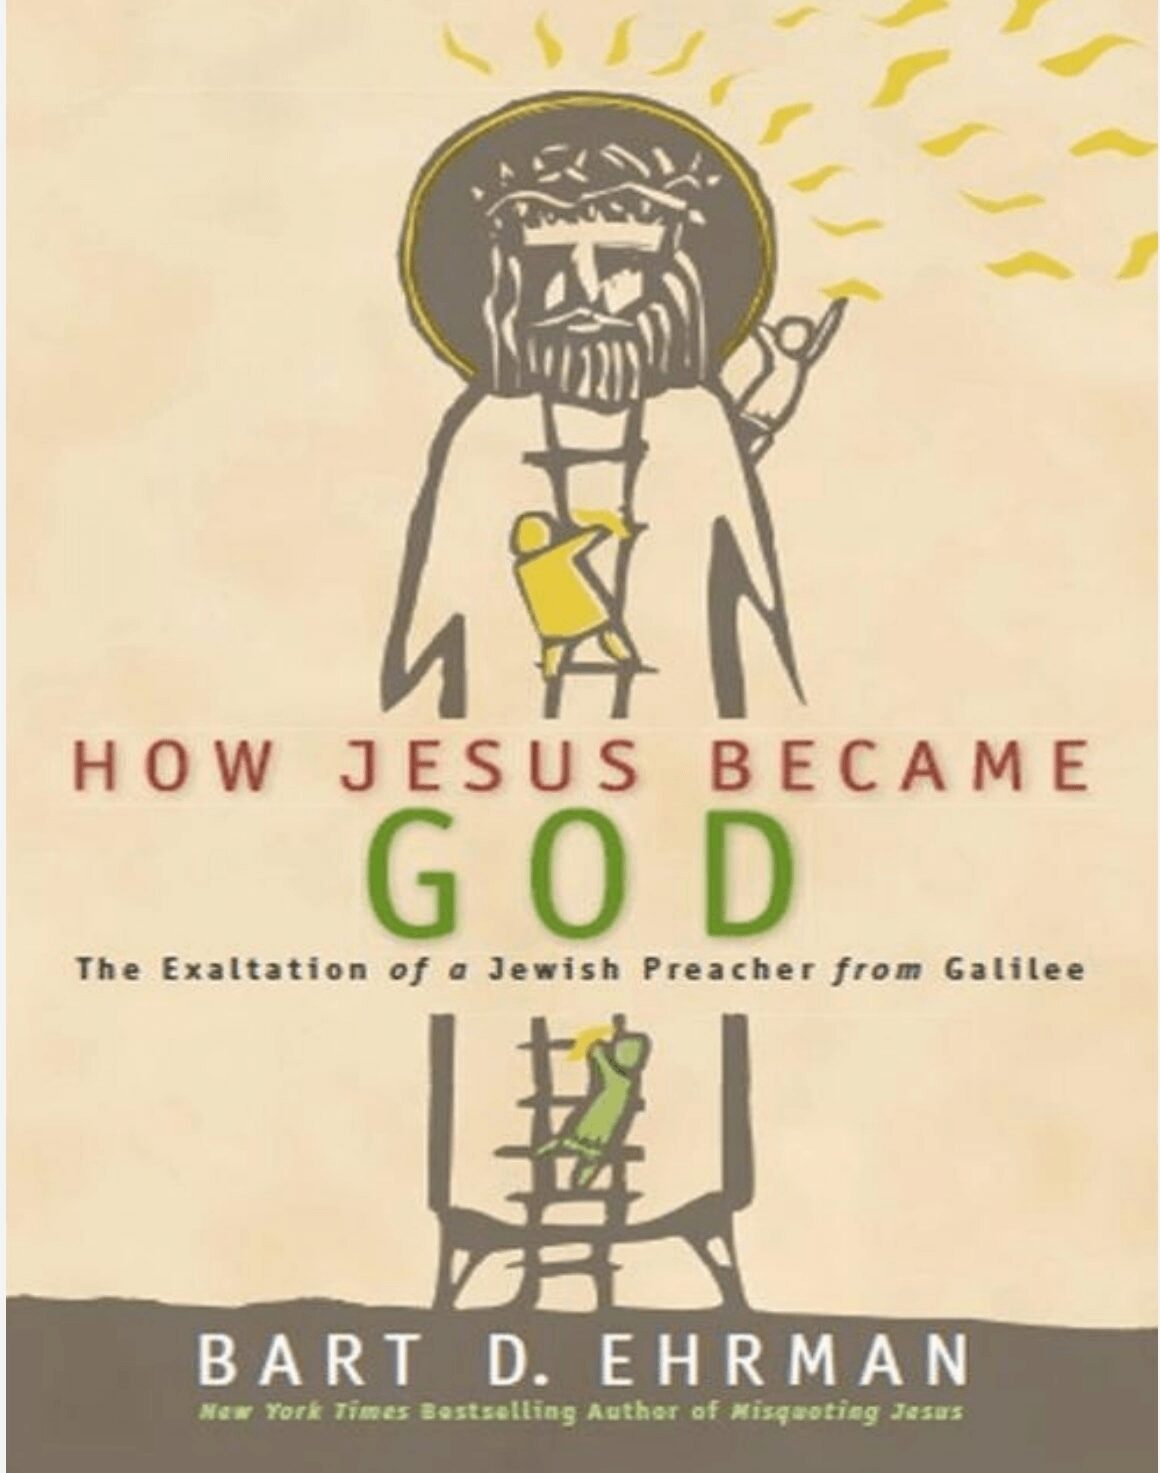 HOW JESUS BECAME GOD The Exaltation of a Jewish Preacher from Galilee BART D. EHRMAN New York Times Bestselling Author of Misquoting Jesus'